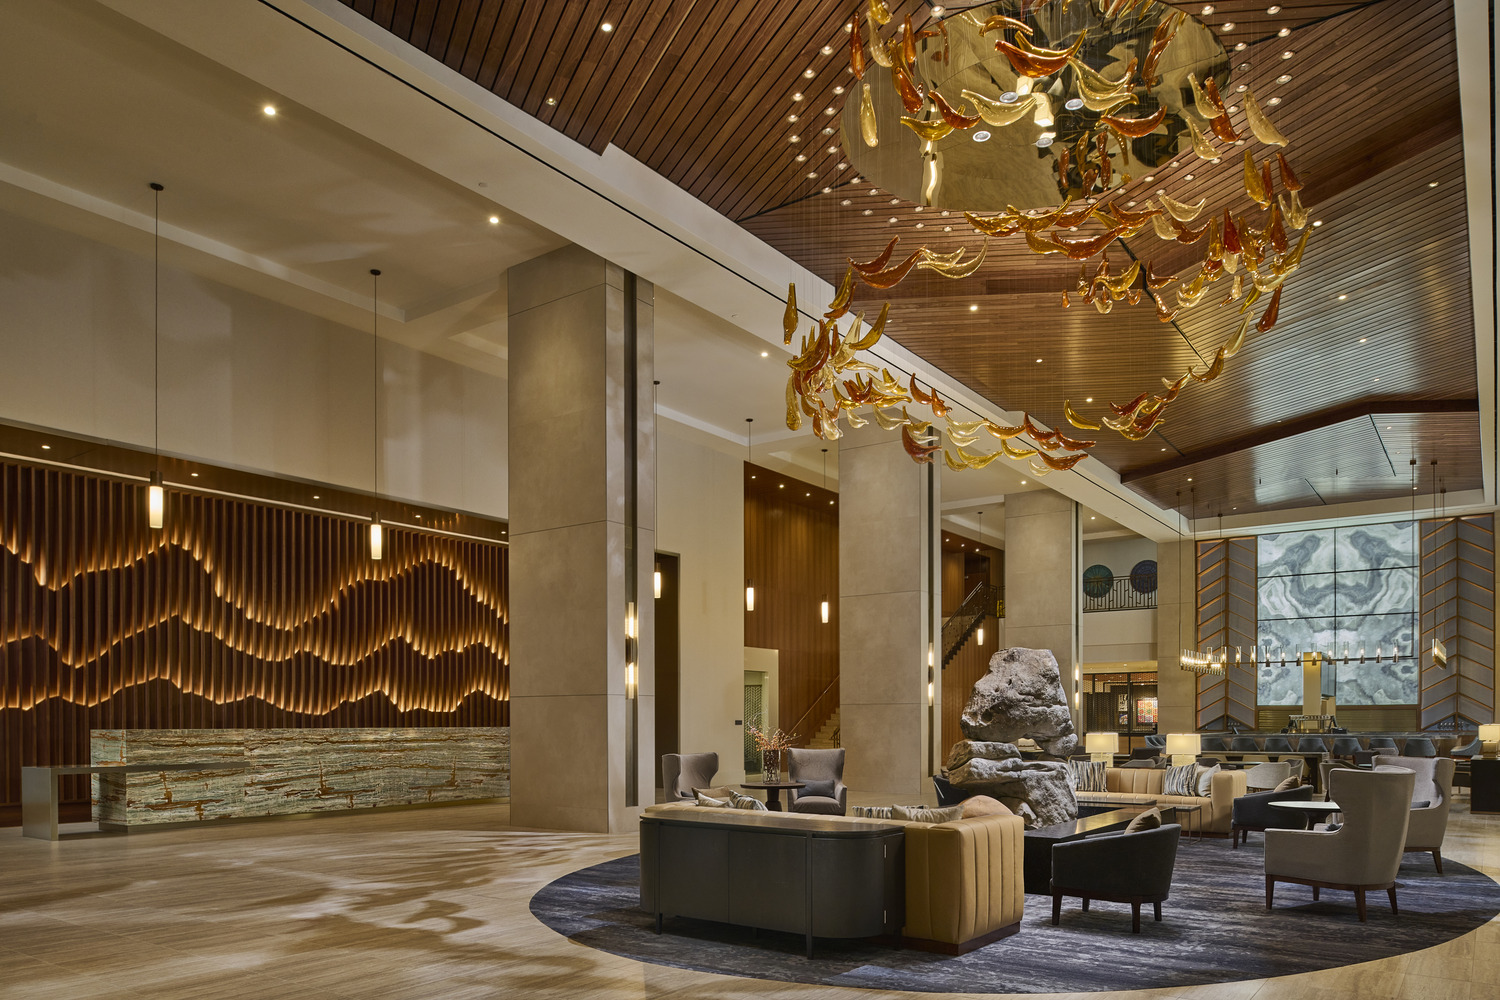 The lobby of a hotel with a large chandelier.